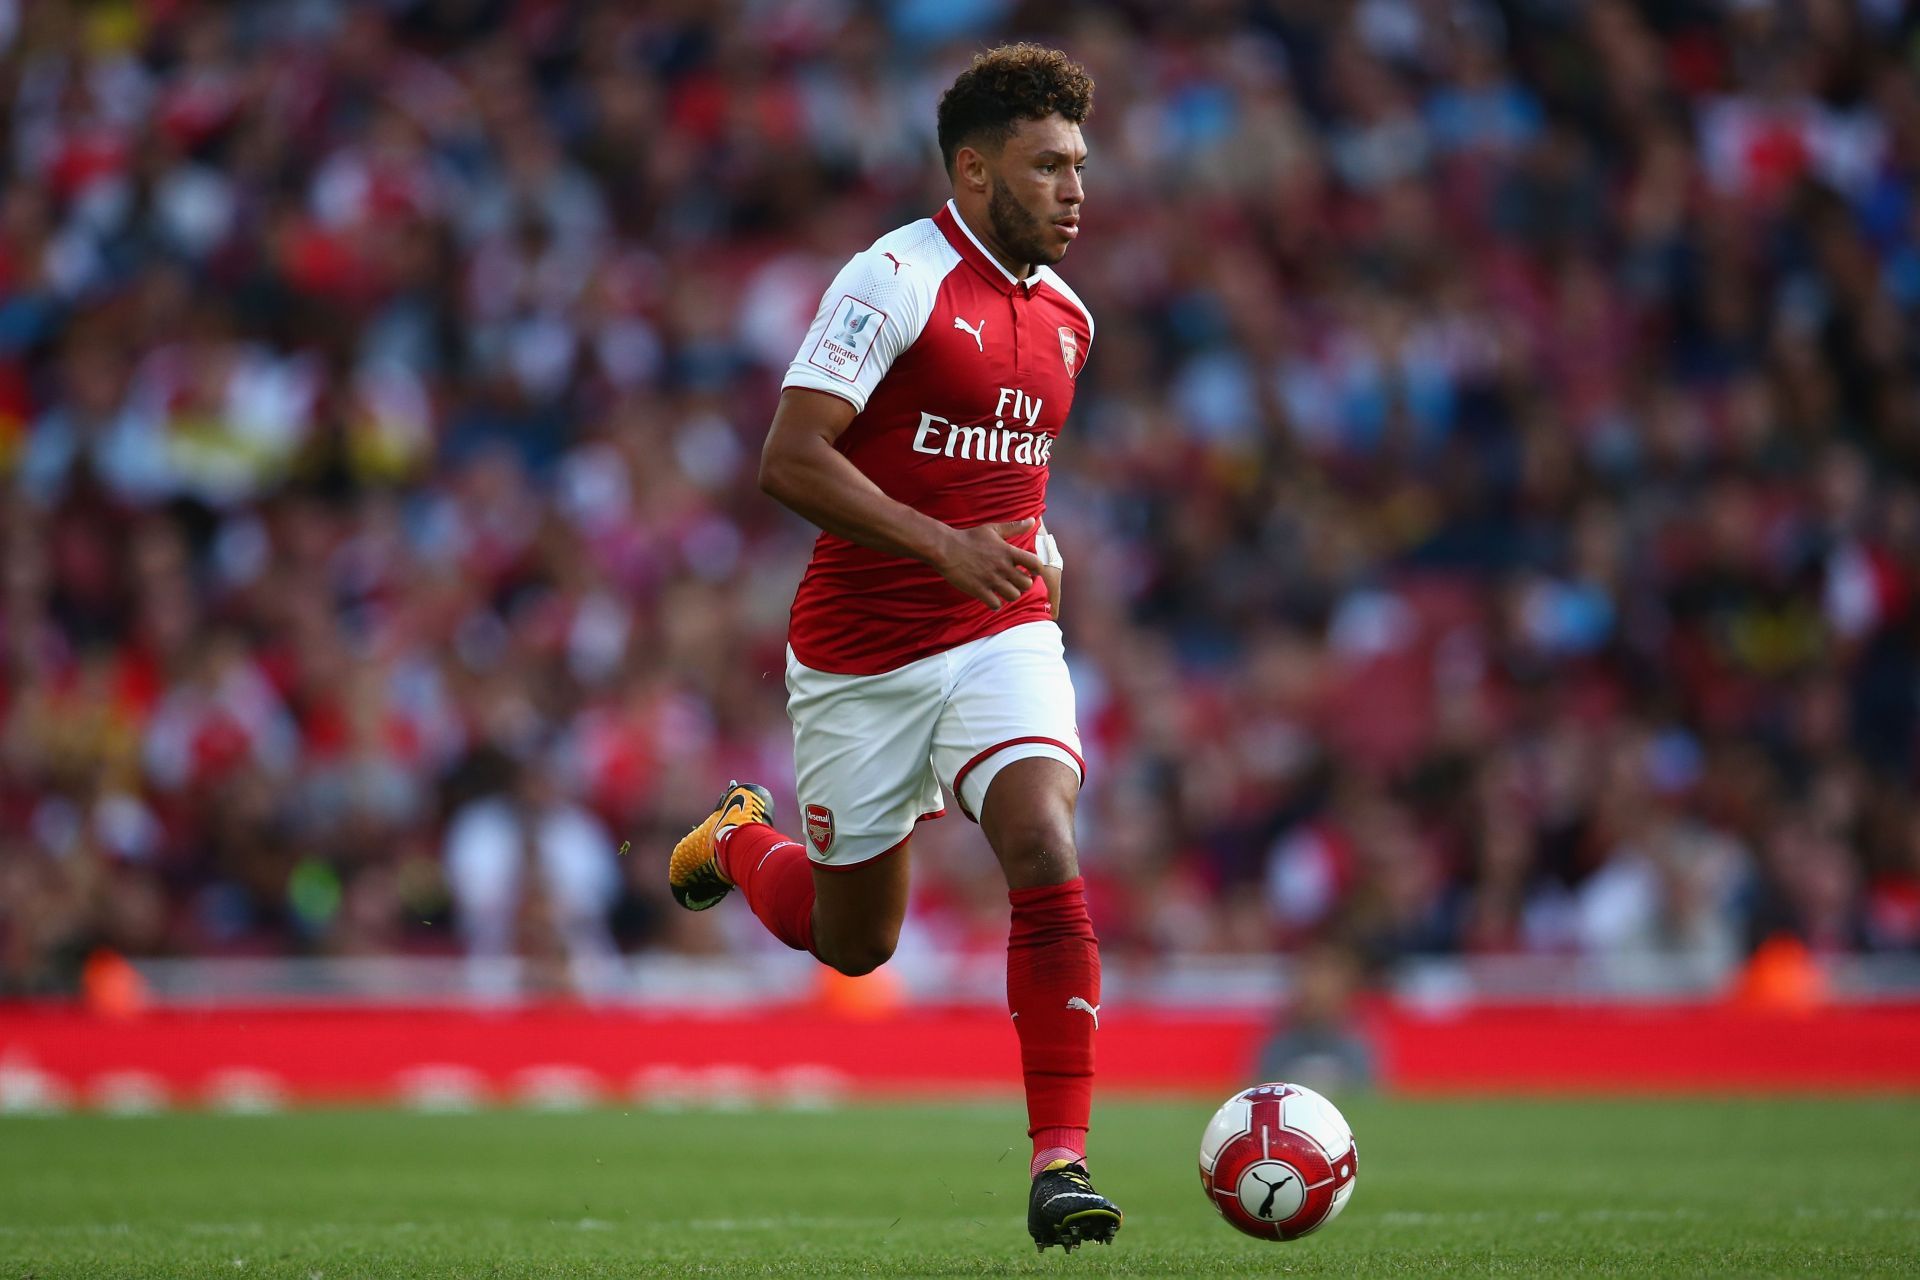 Alex Oxlade-Chamberlain is doing better at Liverpool